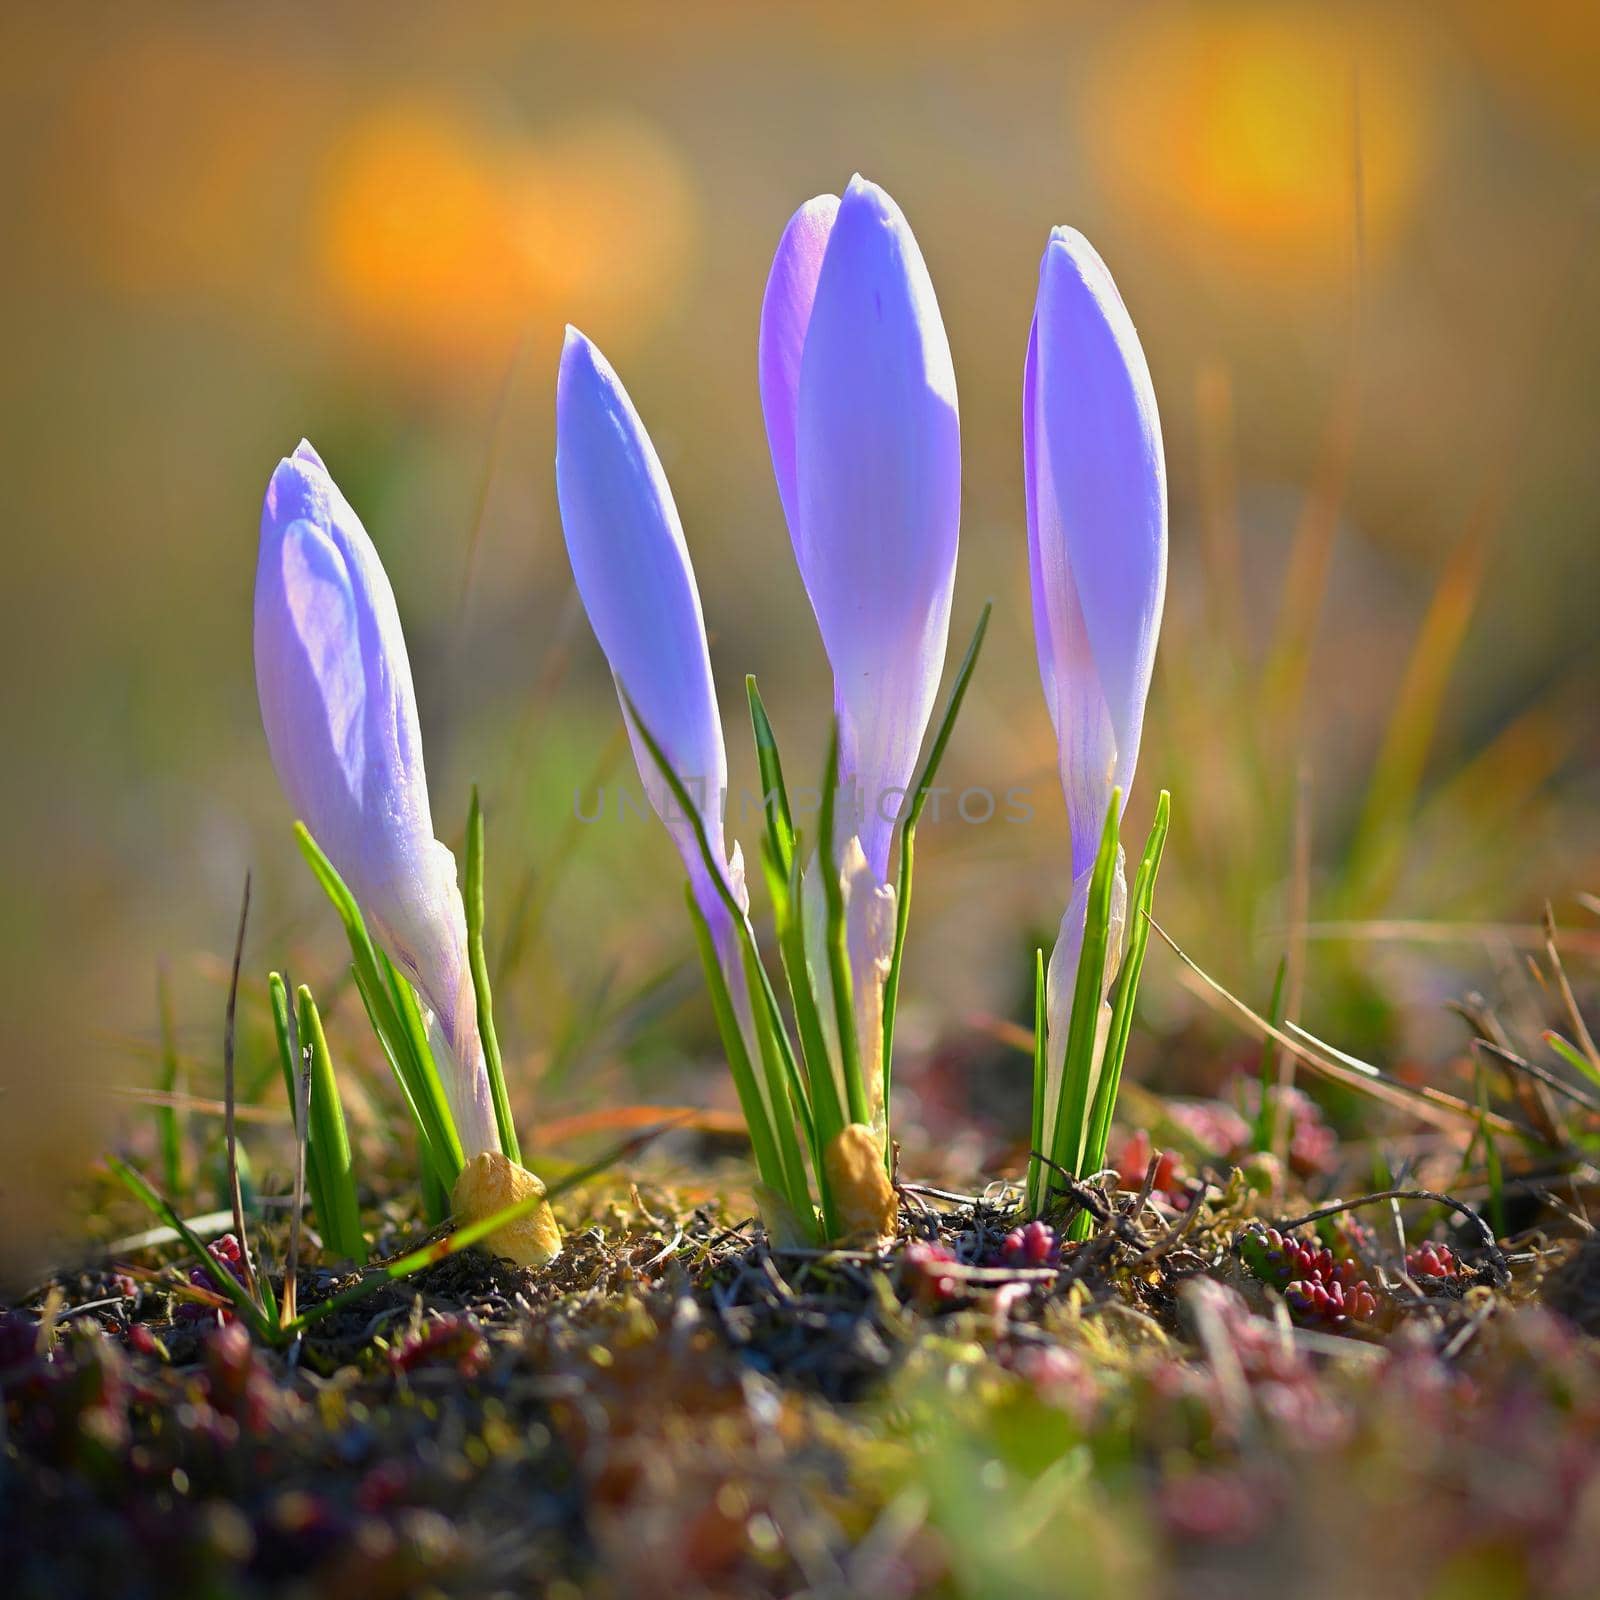 Spring background with flowers. Beautifully colored flowering crocus - saffron on a sunny day. Nature photography in spring time.